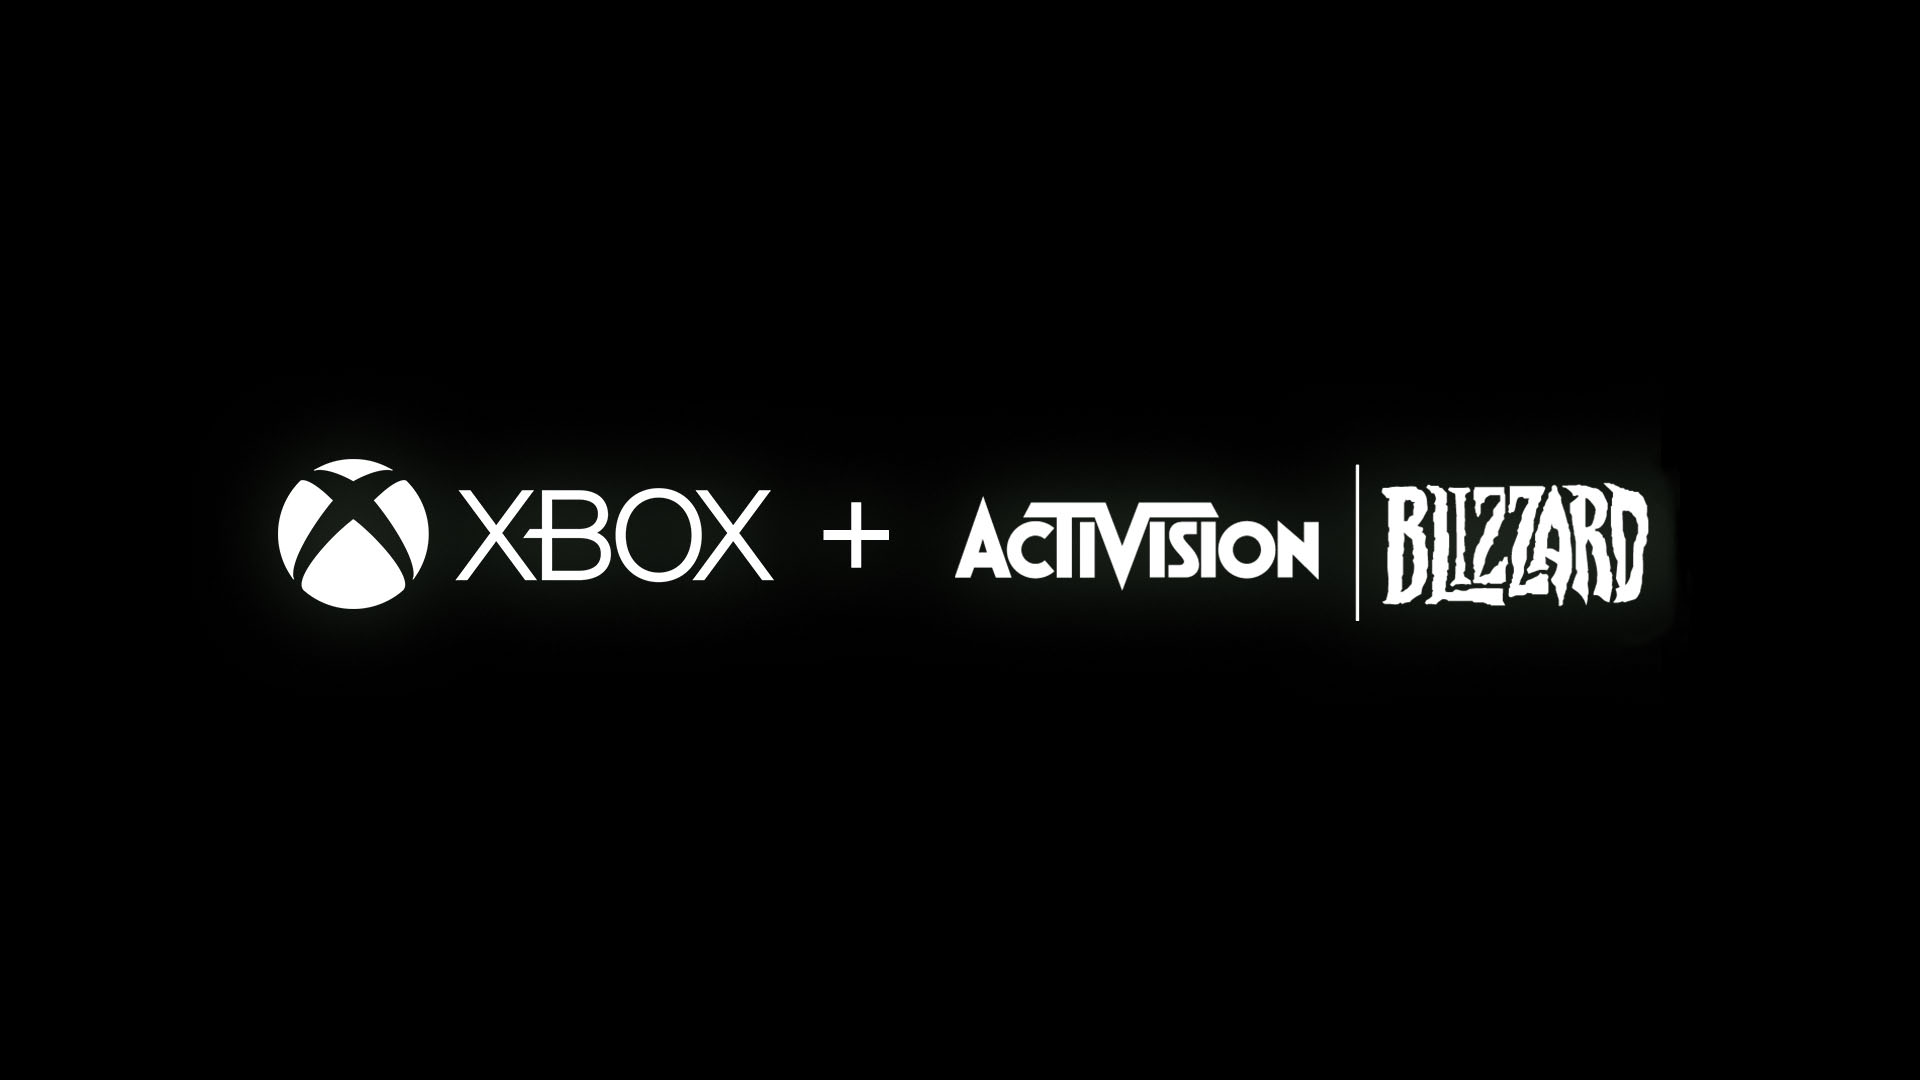 FTC reportedly considering antitrust lawsuit for Microsoft acquisition of Activision Blizzard